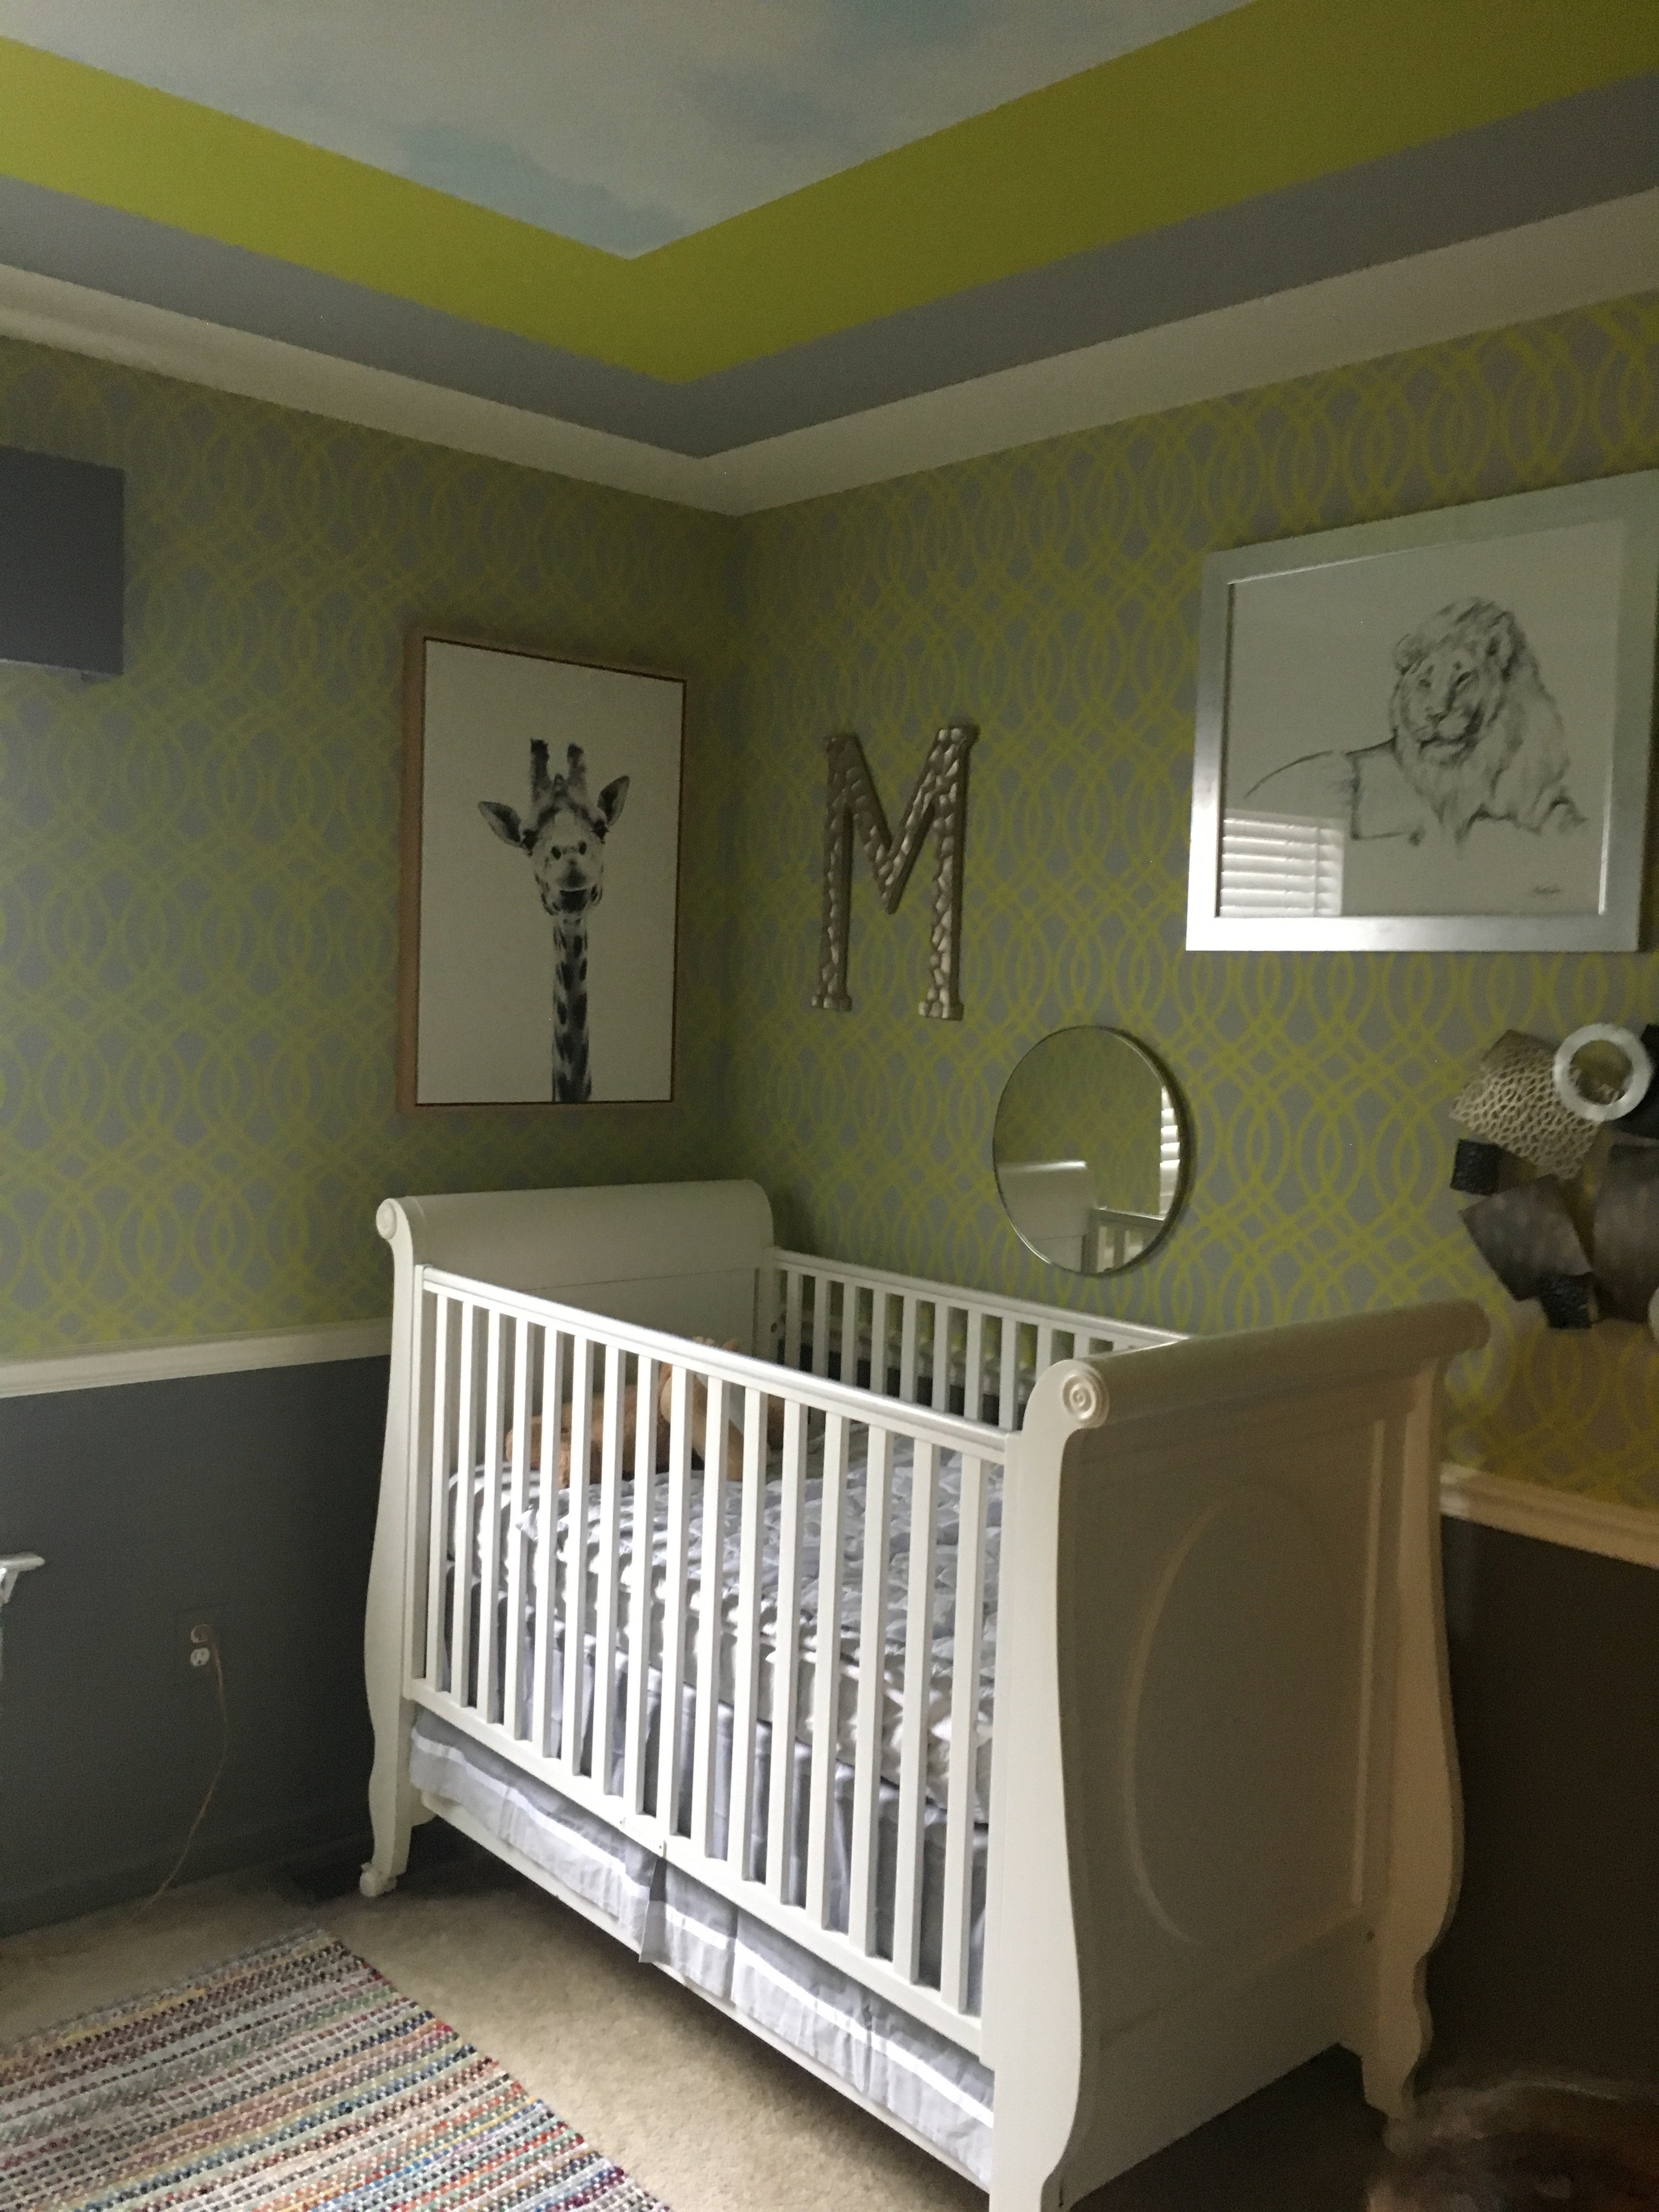 Miles bedroom is stenciled in a gray and chartreuse pattern.